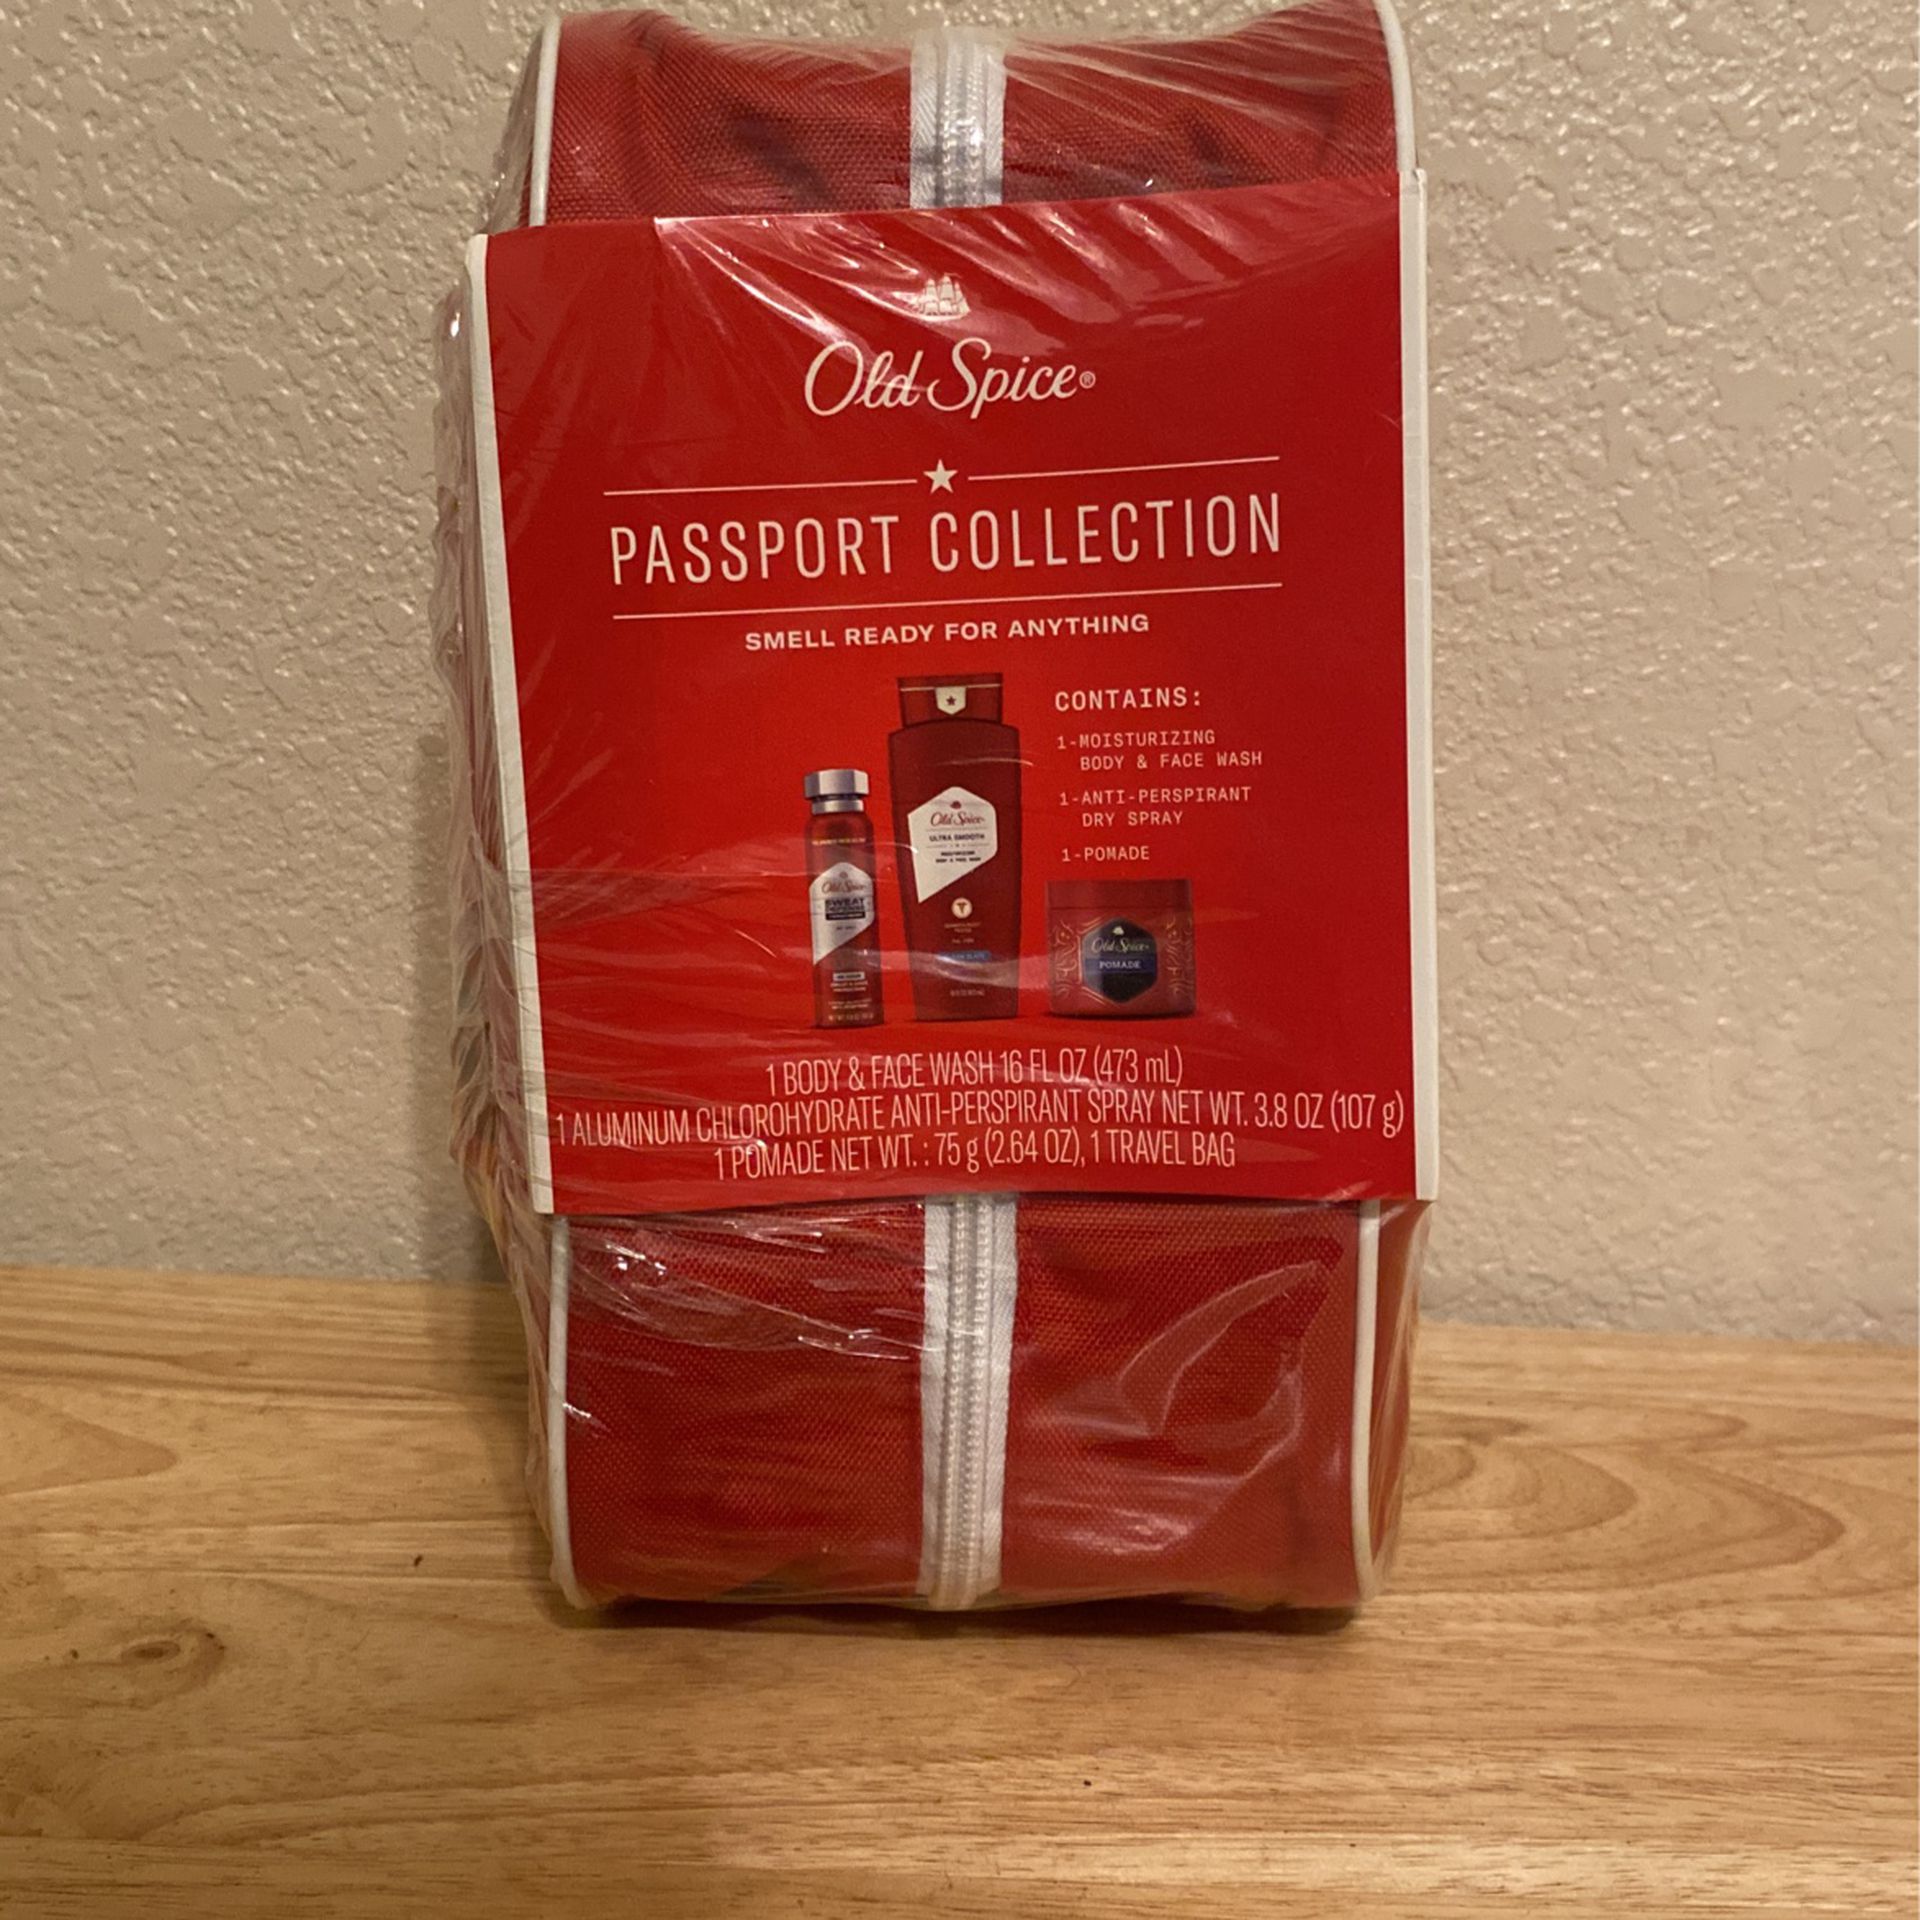 Old spice passport collection